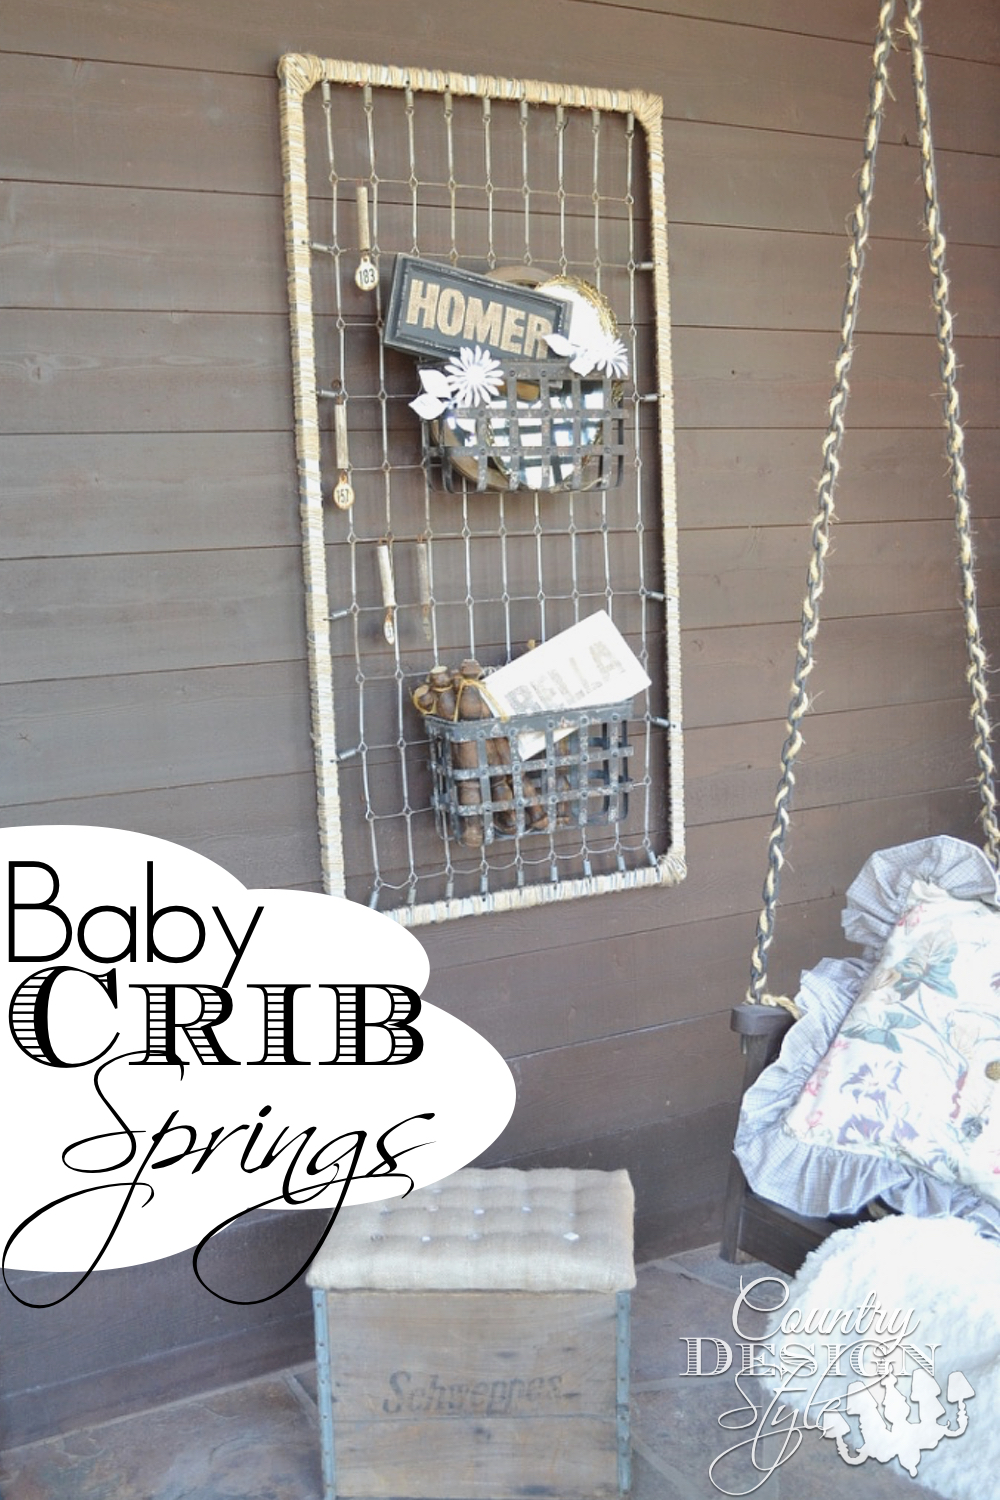 Turning our front porch to rustic farmhouse style with baby crib springs, rustic crate ottoman and rope chains. Country Design Style